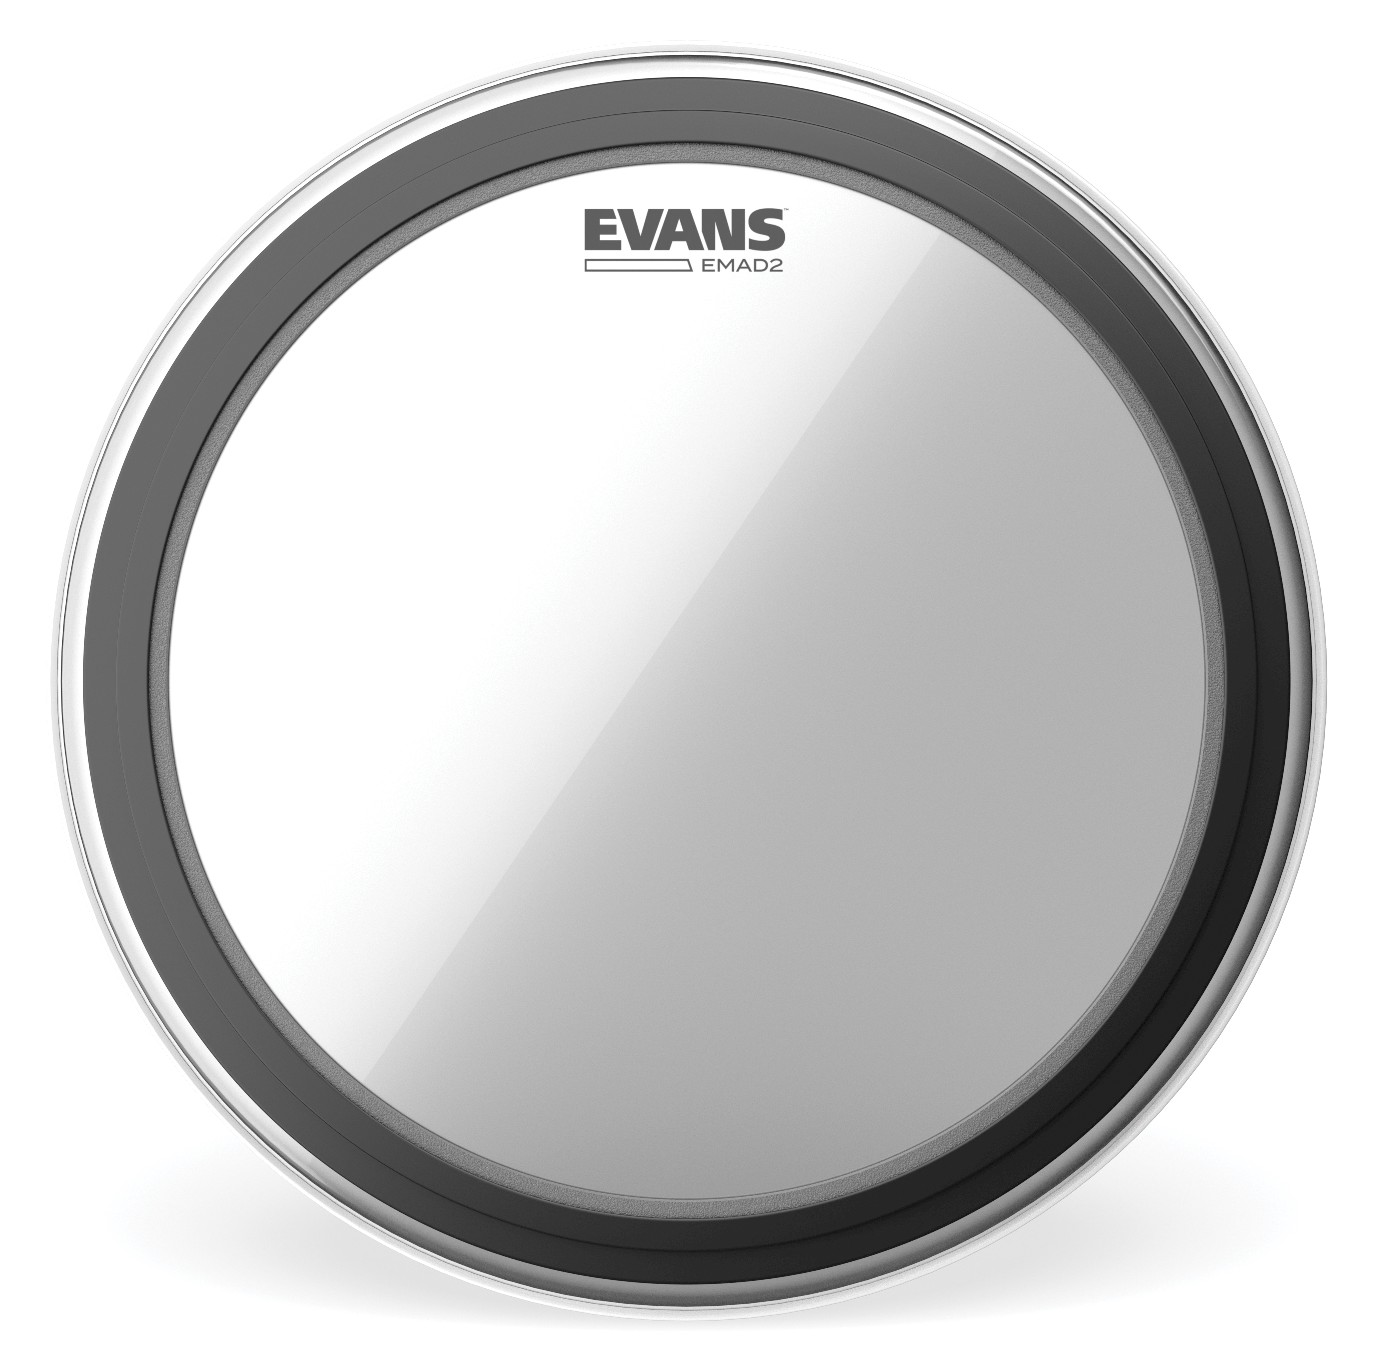 Evans BD20EMAD2 Fell 20" EMAD clear